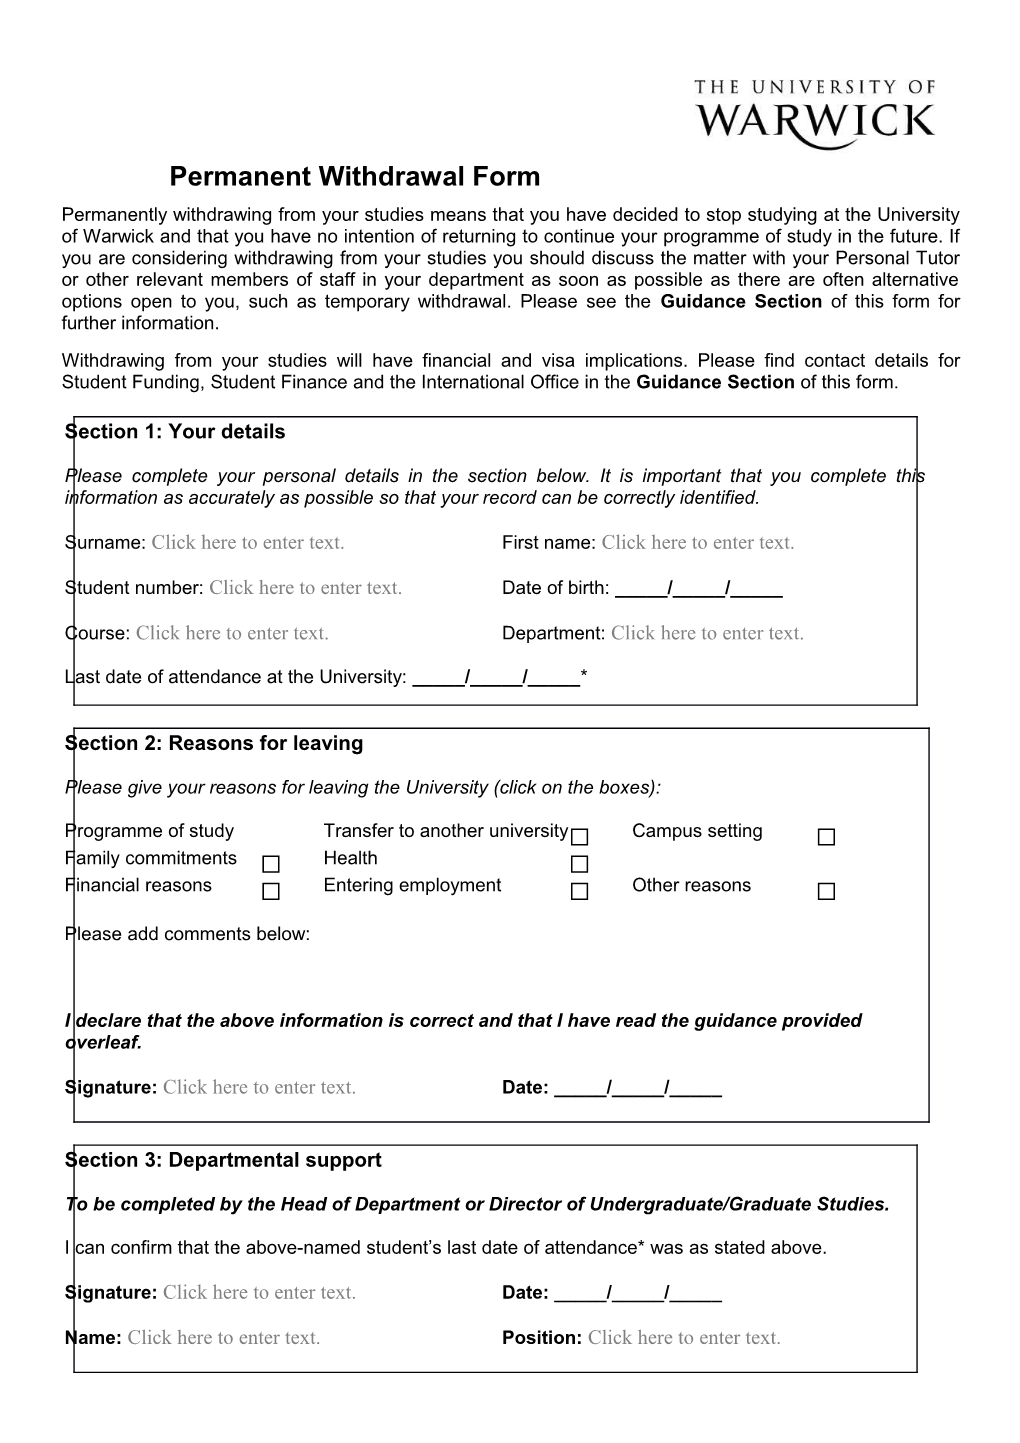 Permanent Withdrawal Form